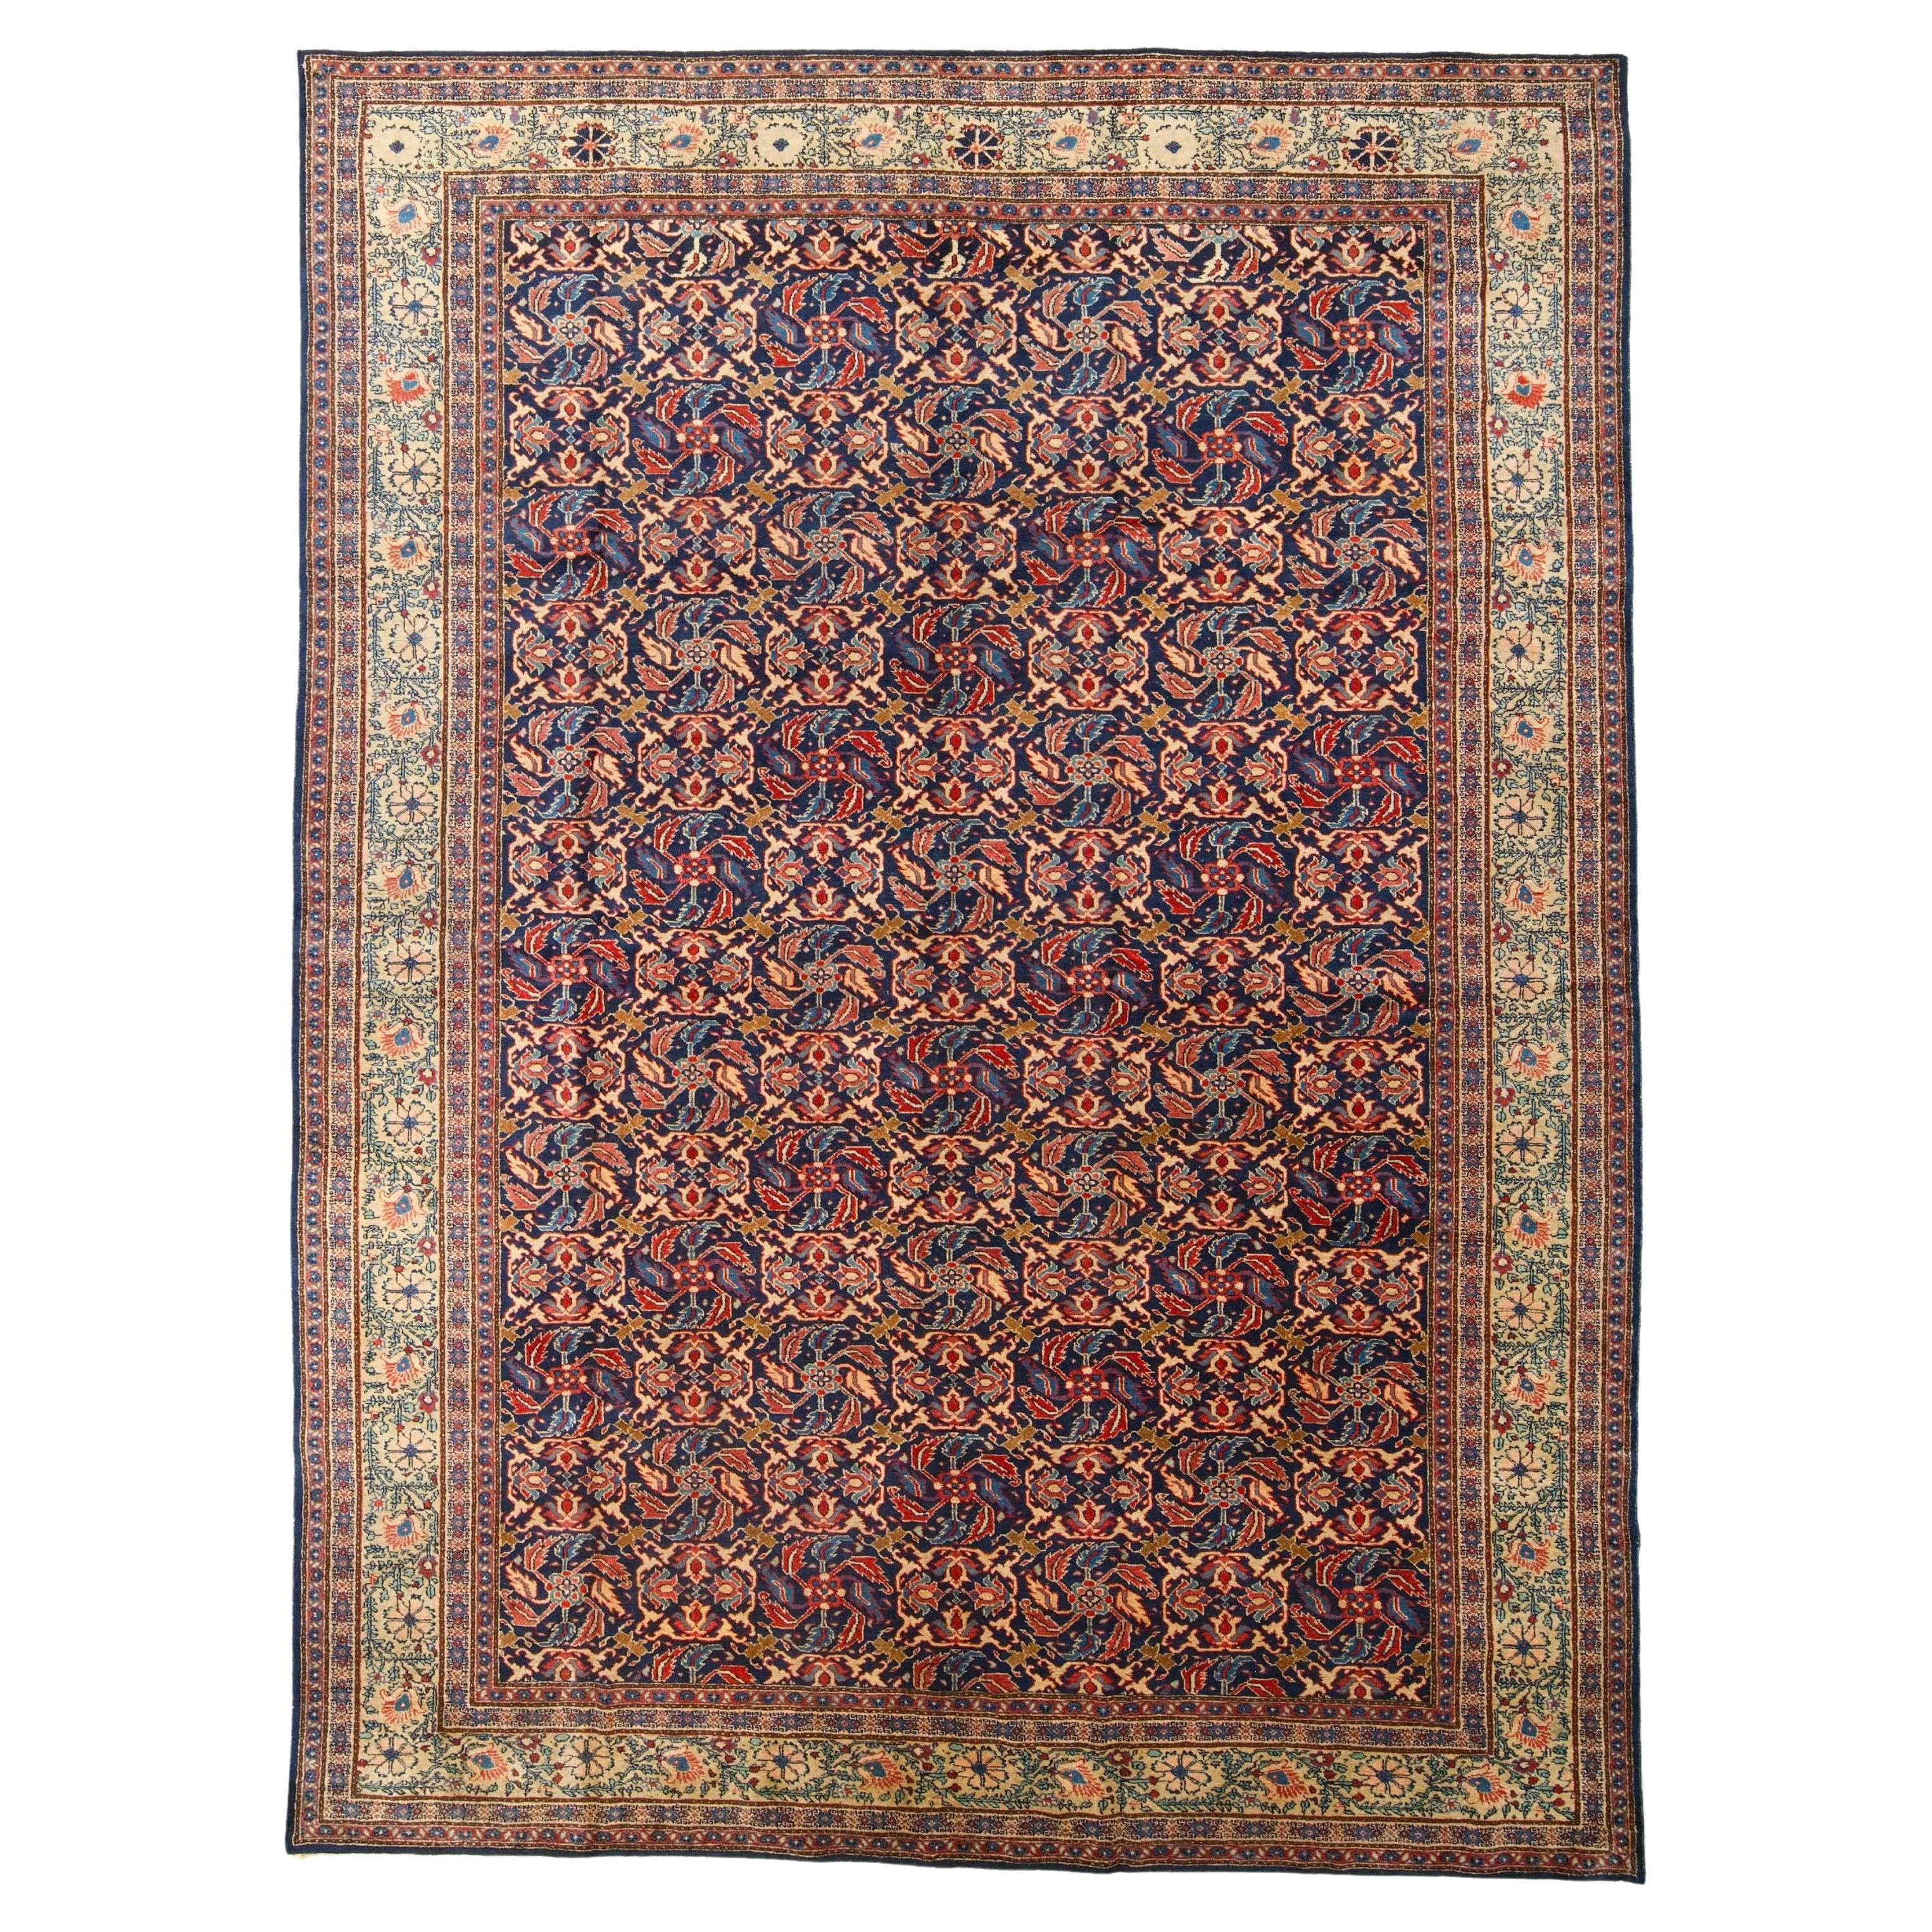 Antique Ferahan Rug - Late 19th Century Ferahan Carpet in Good Condition For Sale